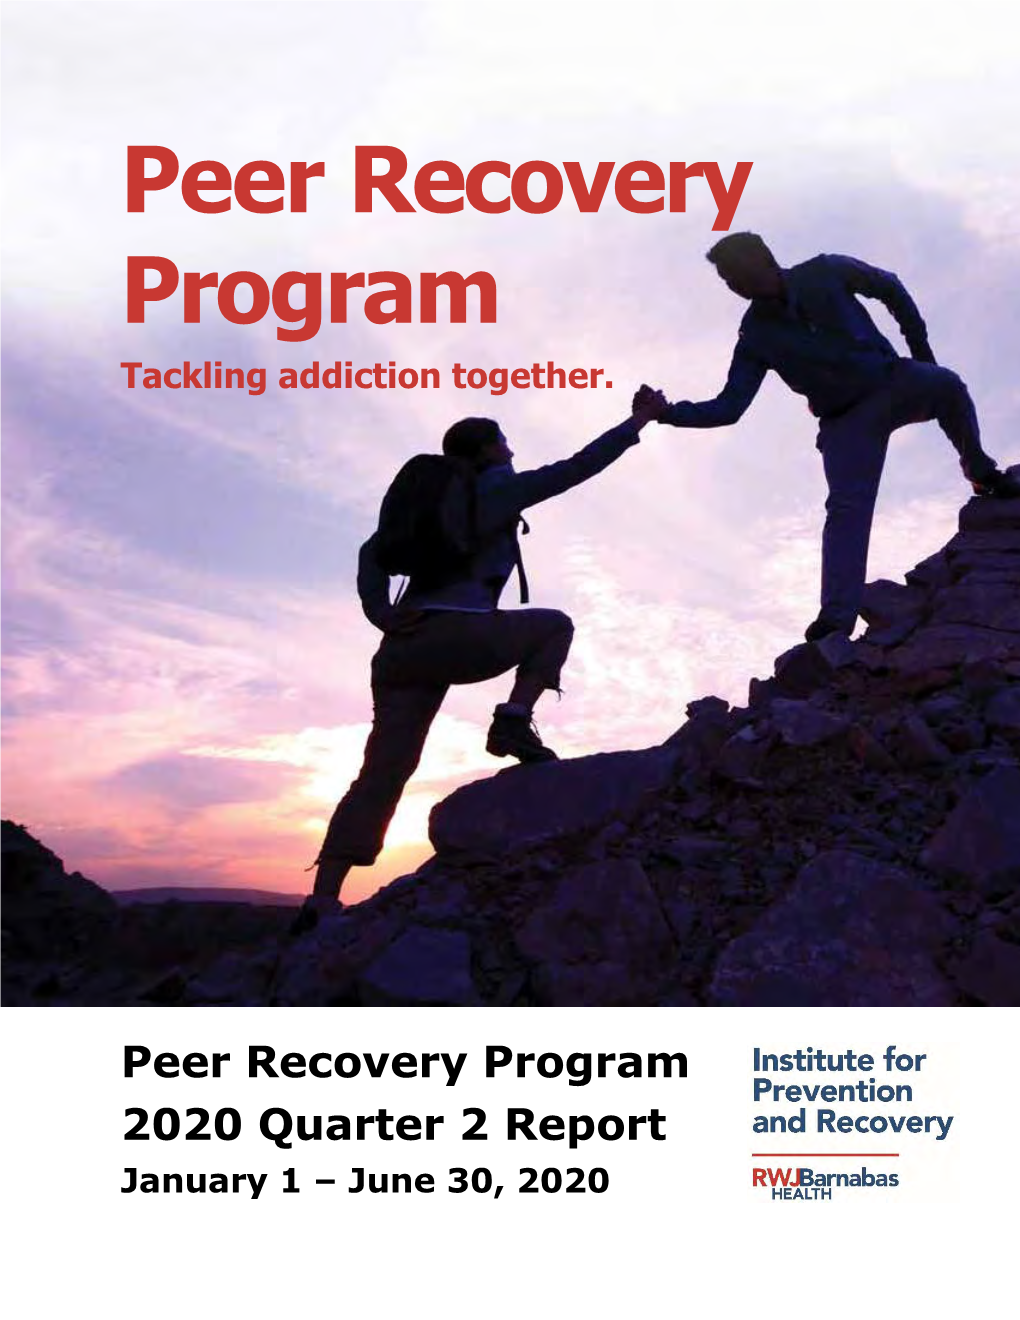 Institute for Prevention and Recovery 2020